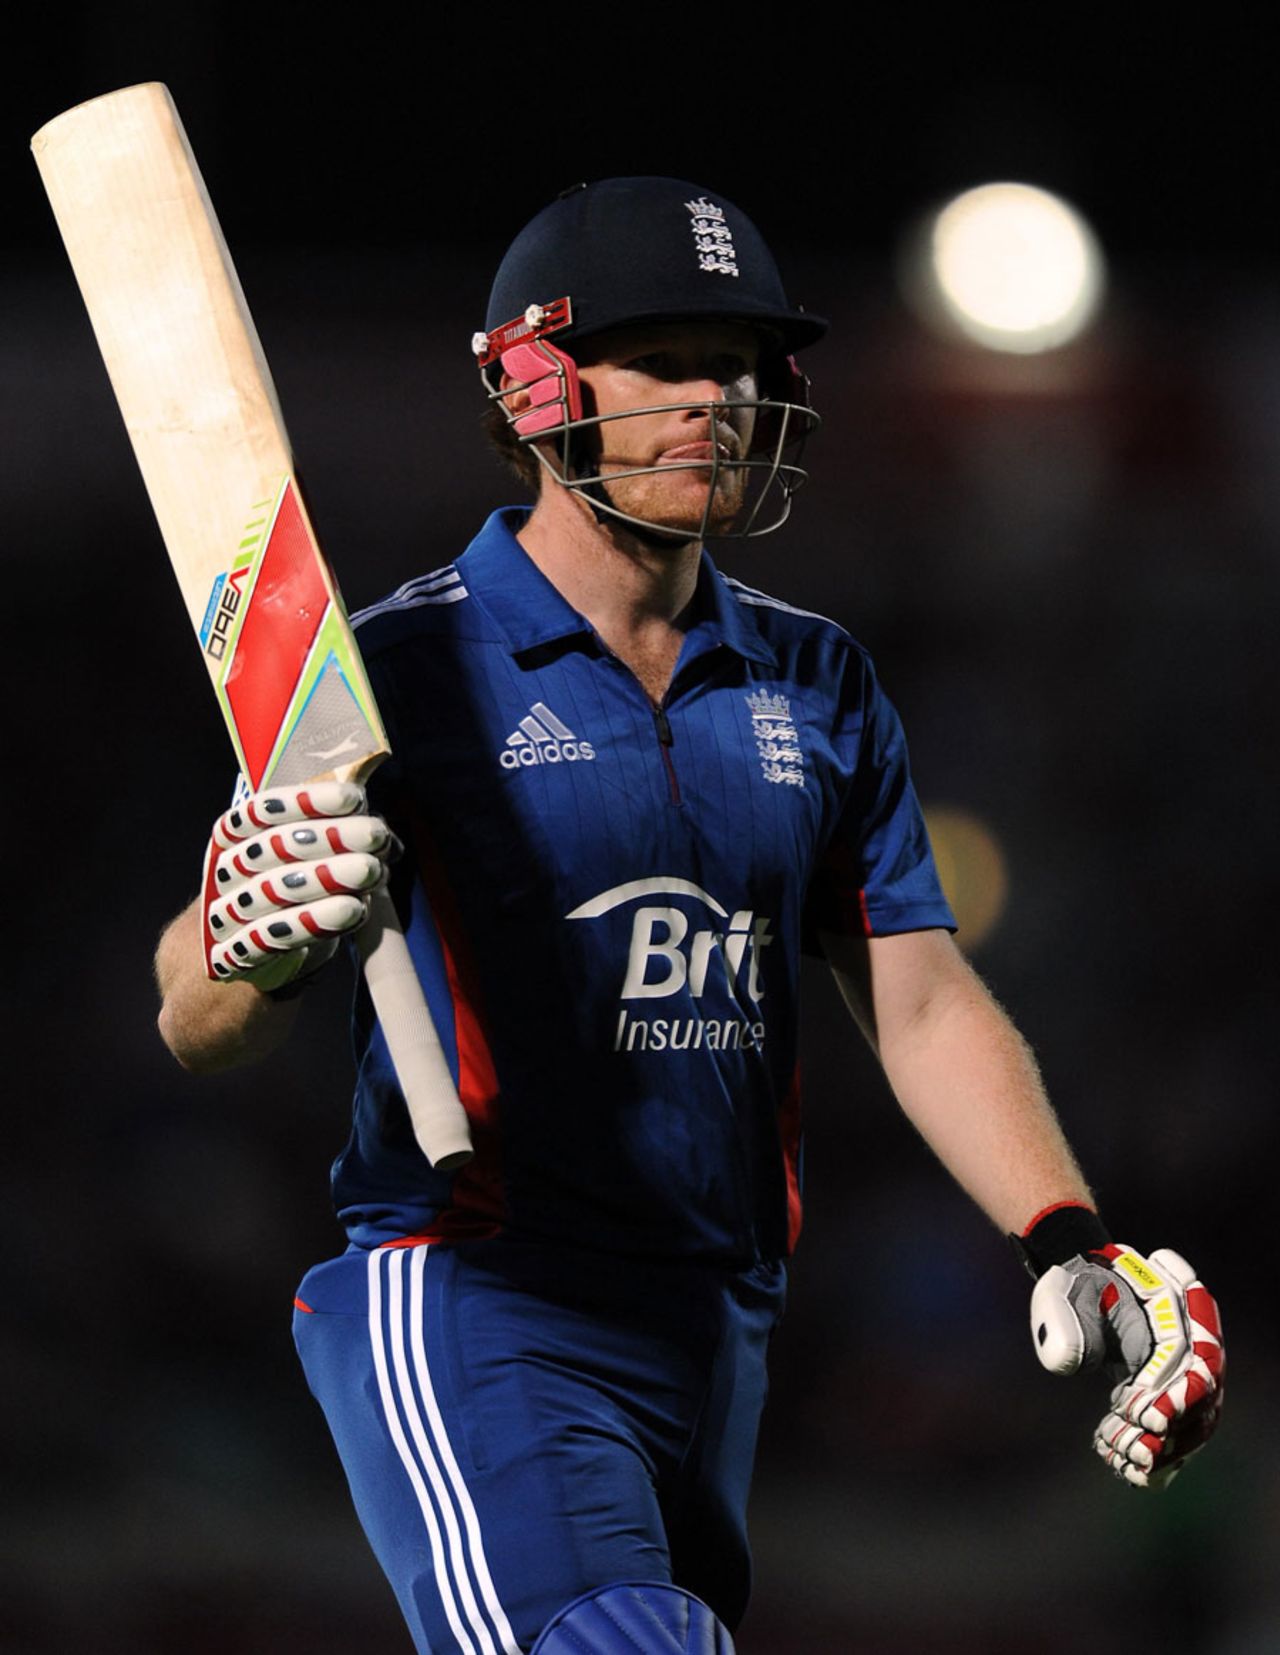 Eoin Morgan made 73 off 67 balls to provide much-needed impetus, England v South Africa, 3rd NatWest ODI, The Oval, August 31, 2012